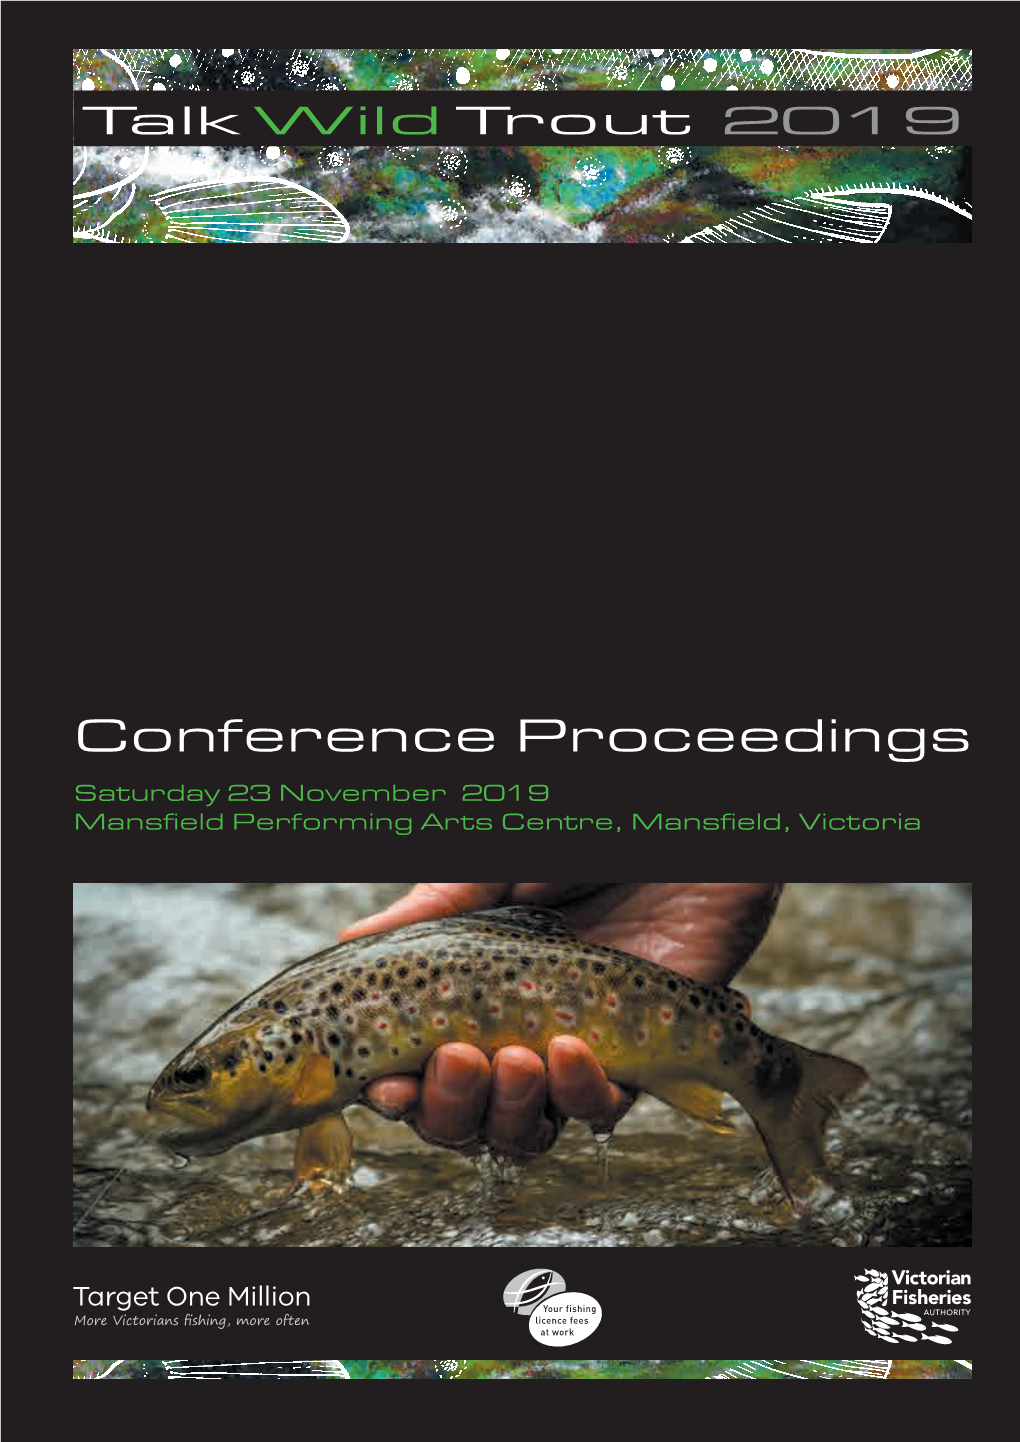 Talk Wild Trout Conference Proceedings 2019